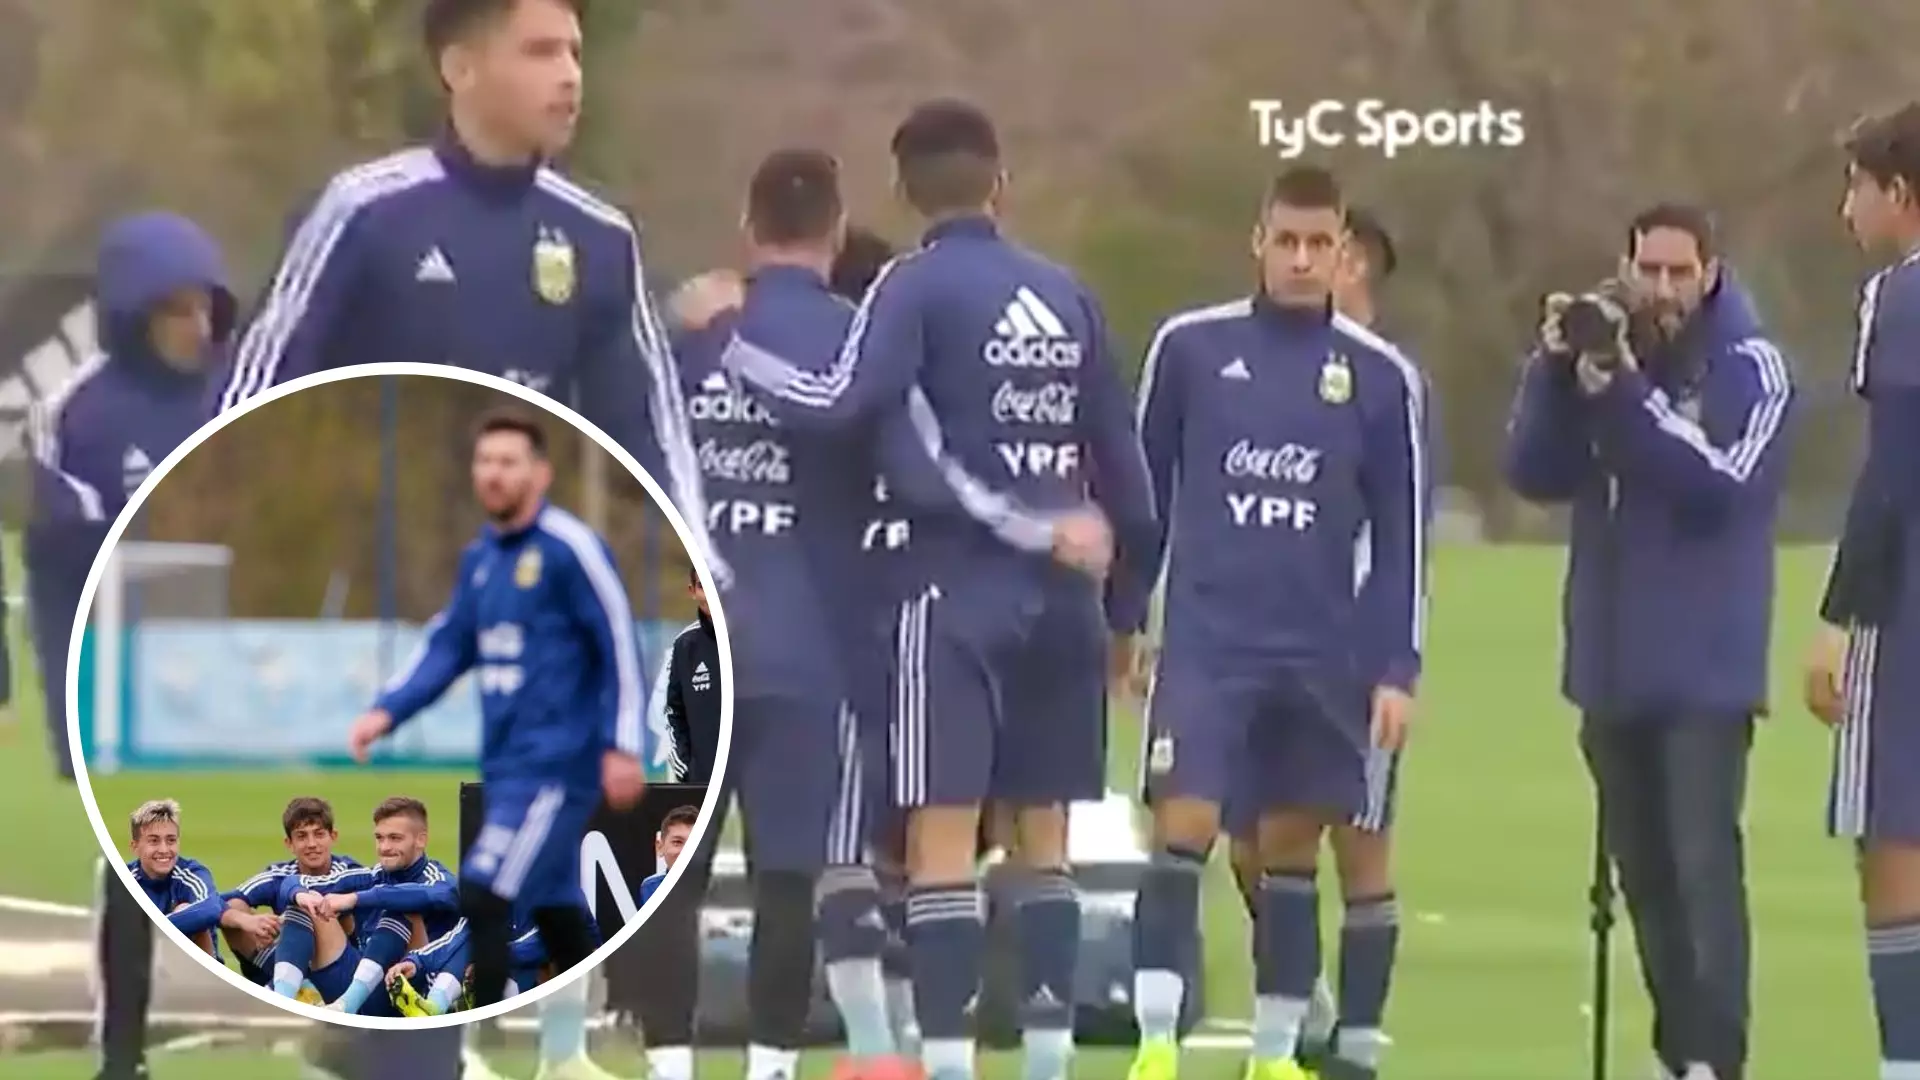 Youngsters Are Starstruck After Meeting Lionel Messi During Training Session With Argentina